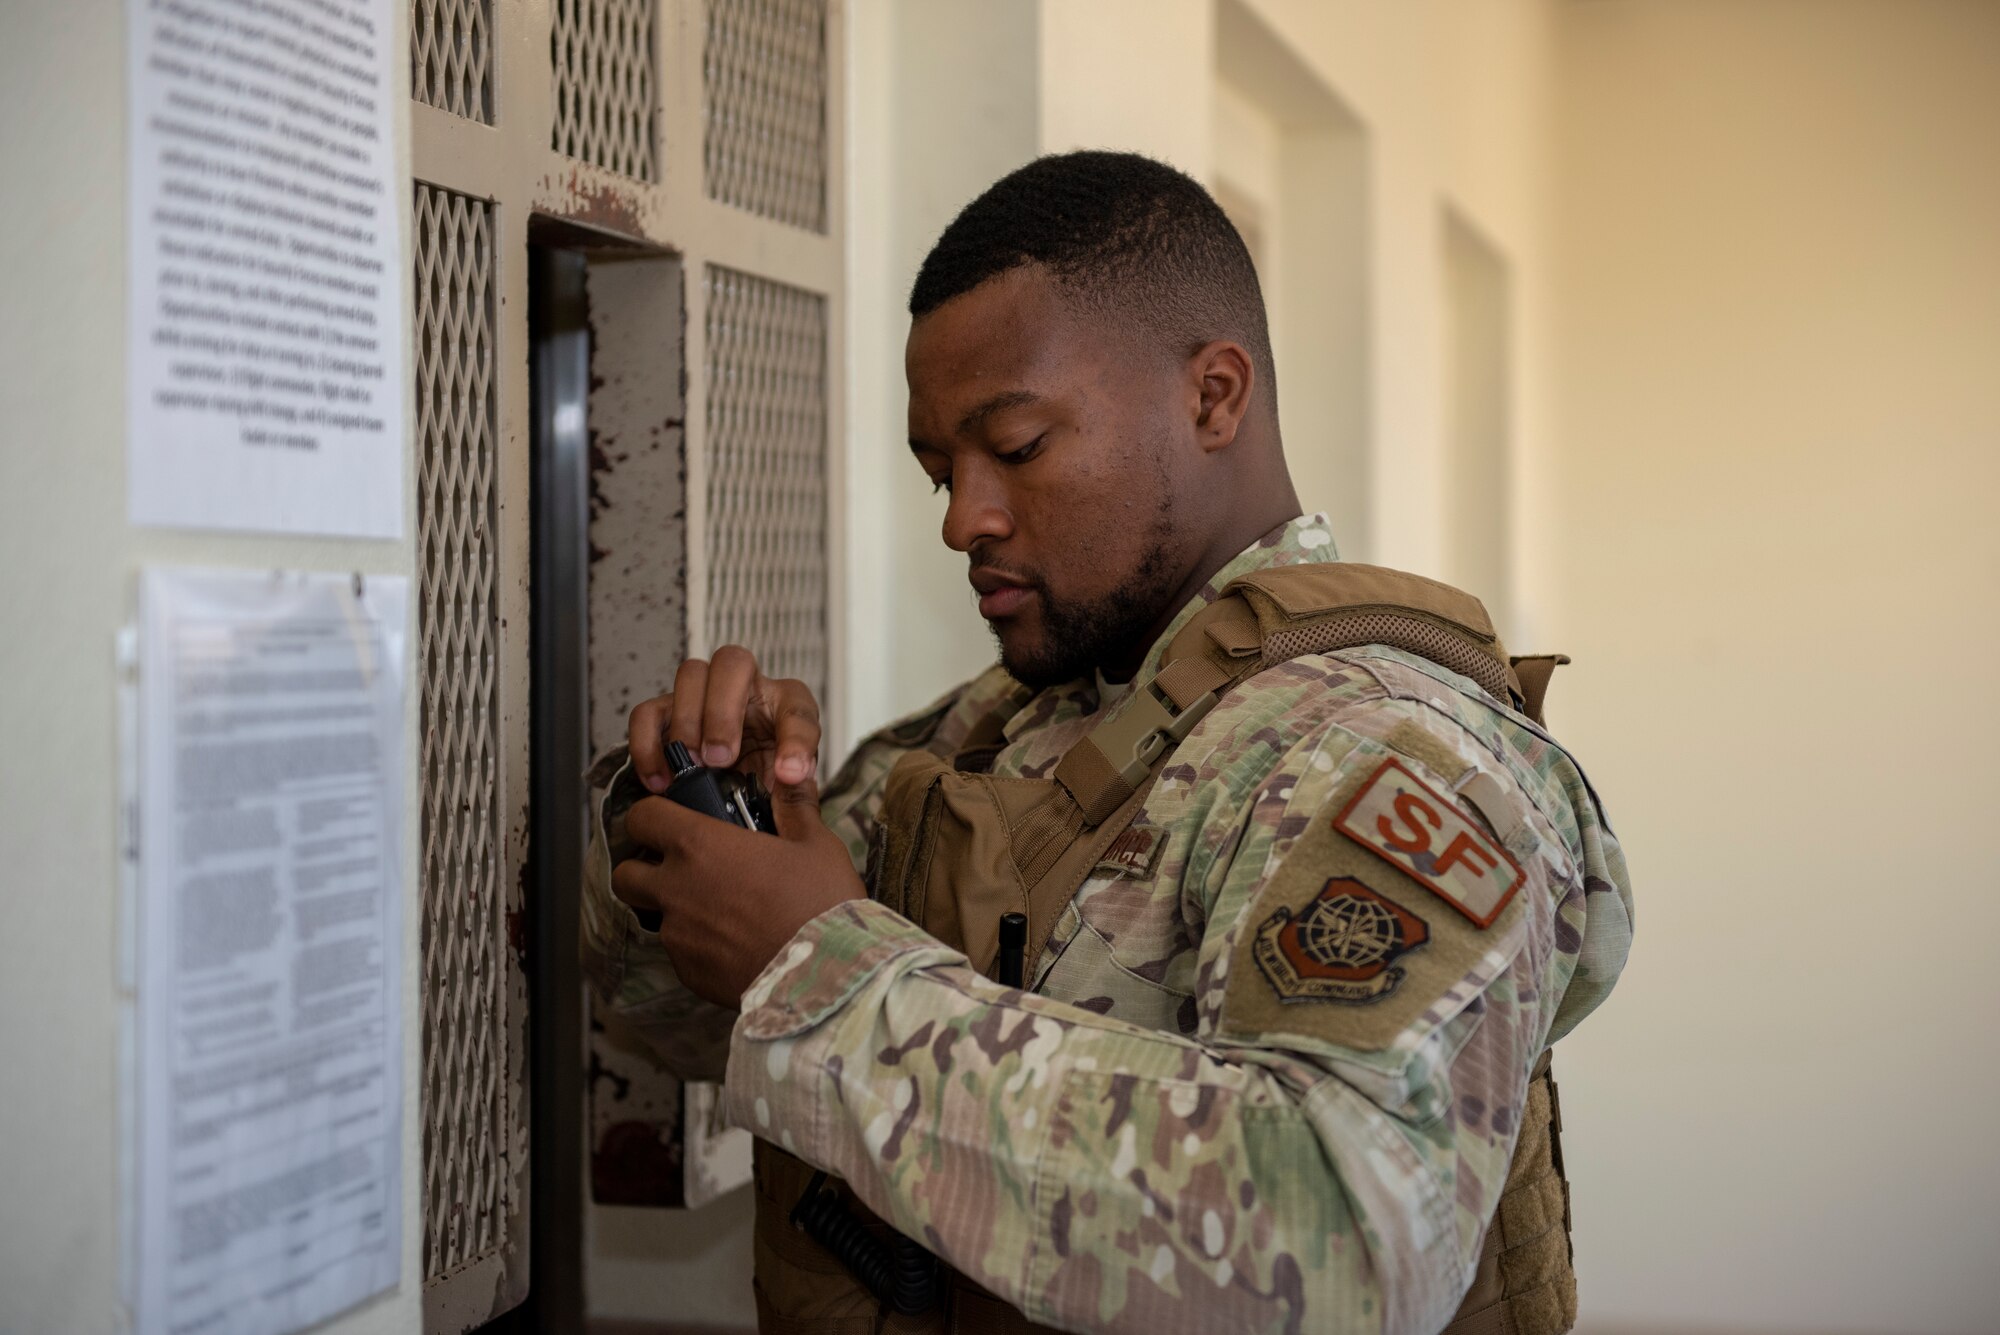 Senior Airman Kelly Goodwin, 60th Security Forces Squadron installation patrolman, checks his radio after receiving it from the armory June 18, 2019, at Travis Air Force Base, California. Security Forces Airmen like Goodwin are responsible for protecting resources and personnel for the Air Force’s largest air mobility wing. (U.S. Air Force photo by Tech. Sgt. James Hodgman)